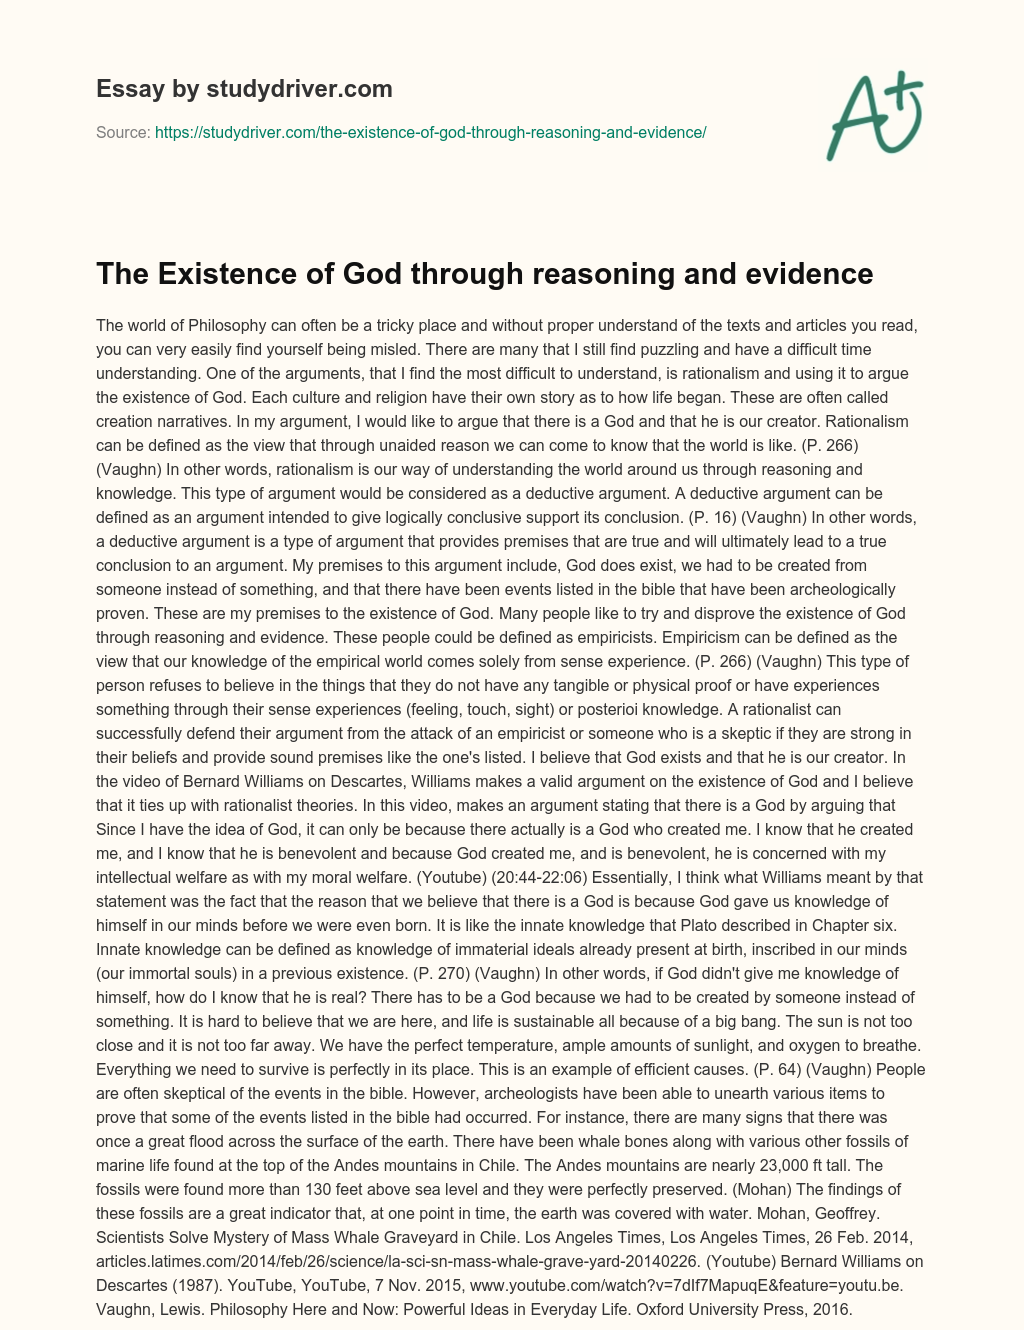 The Existence of God through Reasoning and Evidence essay